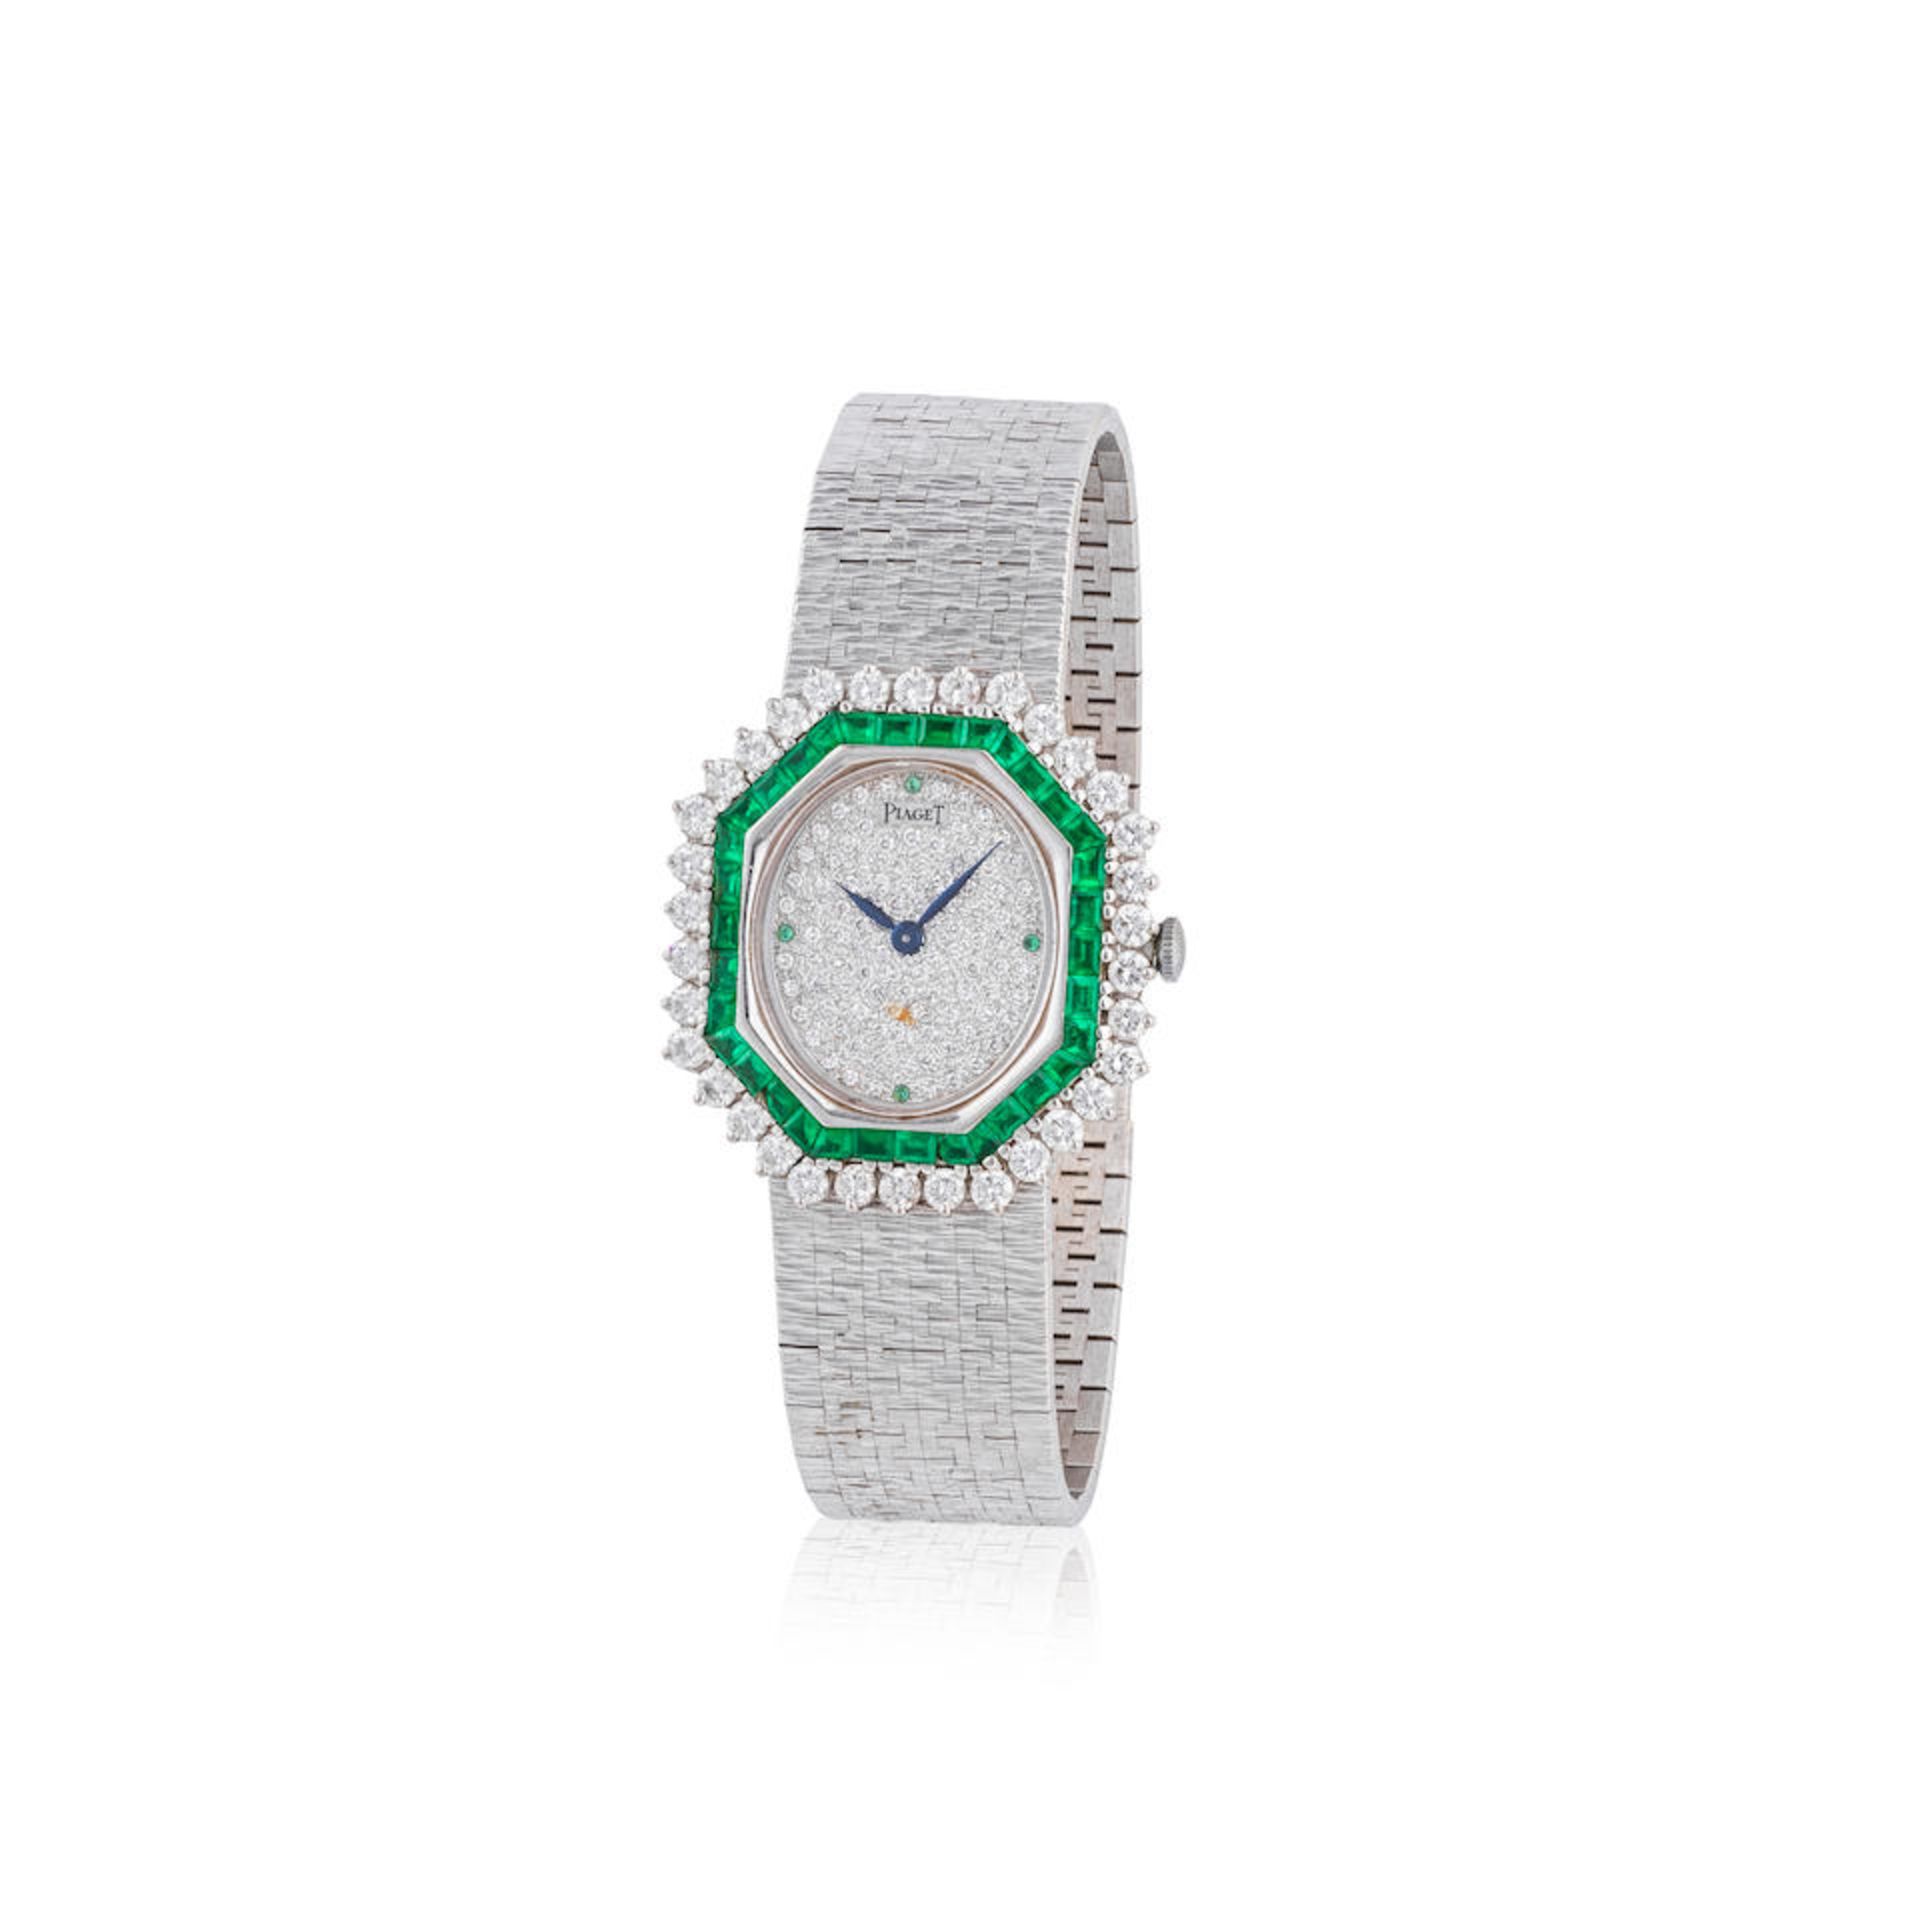 Piaget. A fine lady's 18K white gold manual wind bracelet watch with diamond and emerald set dia...